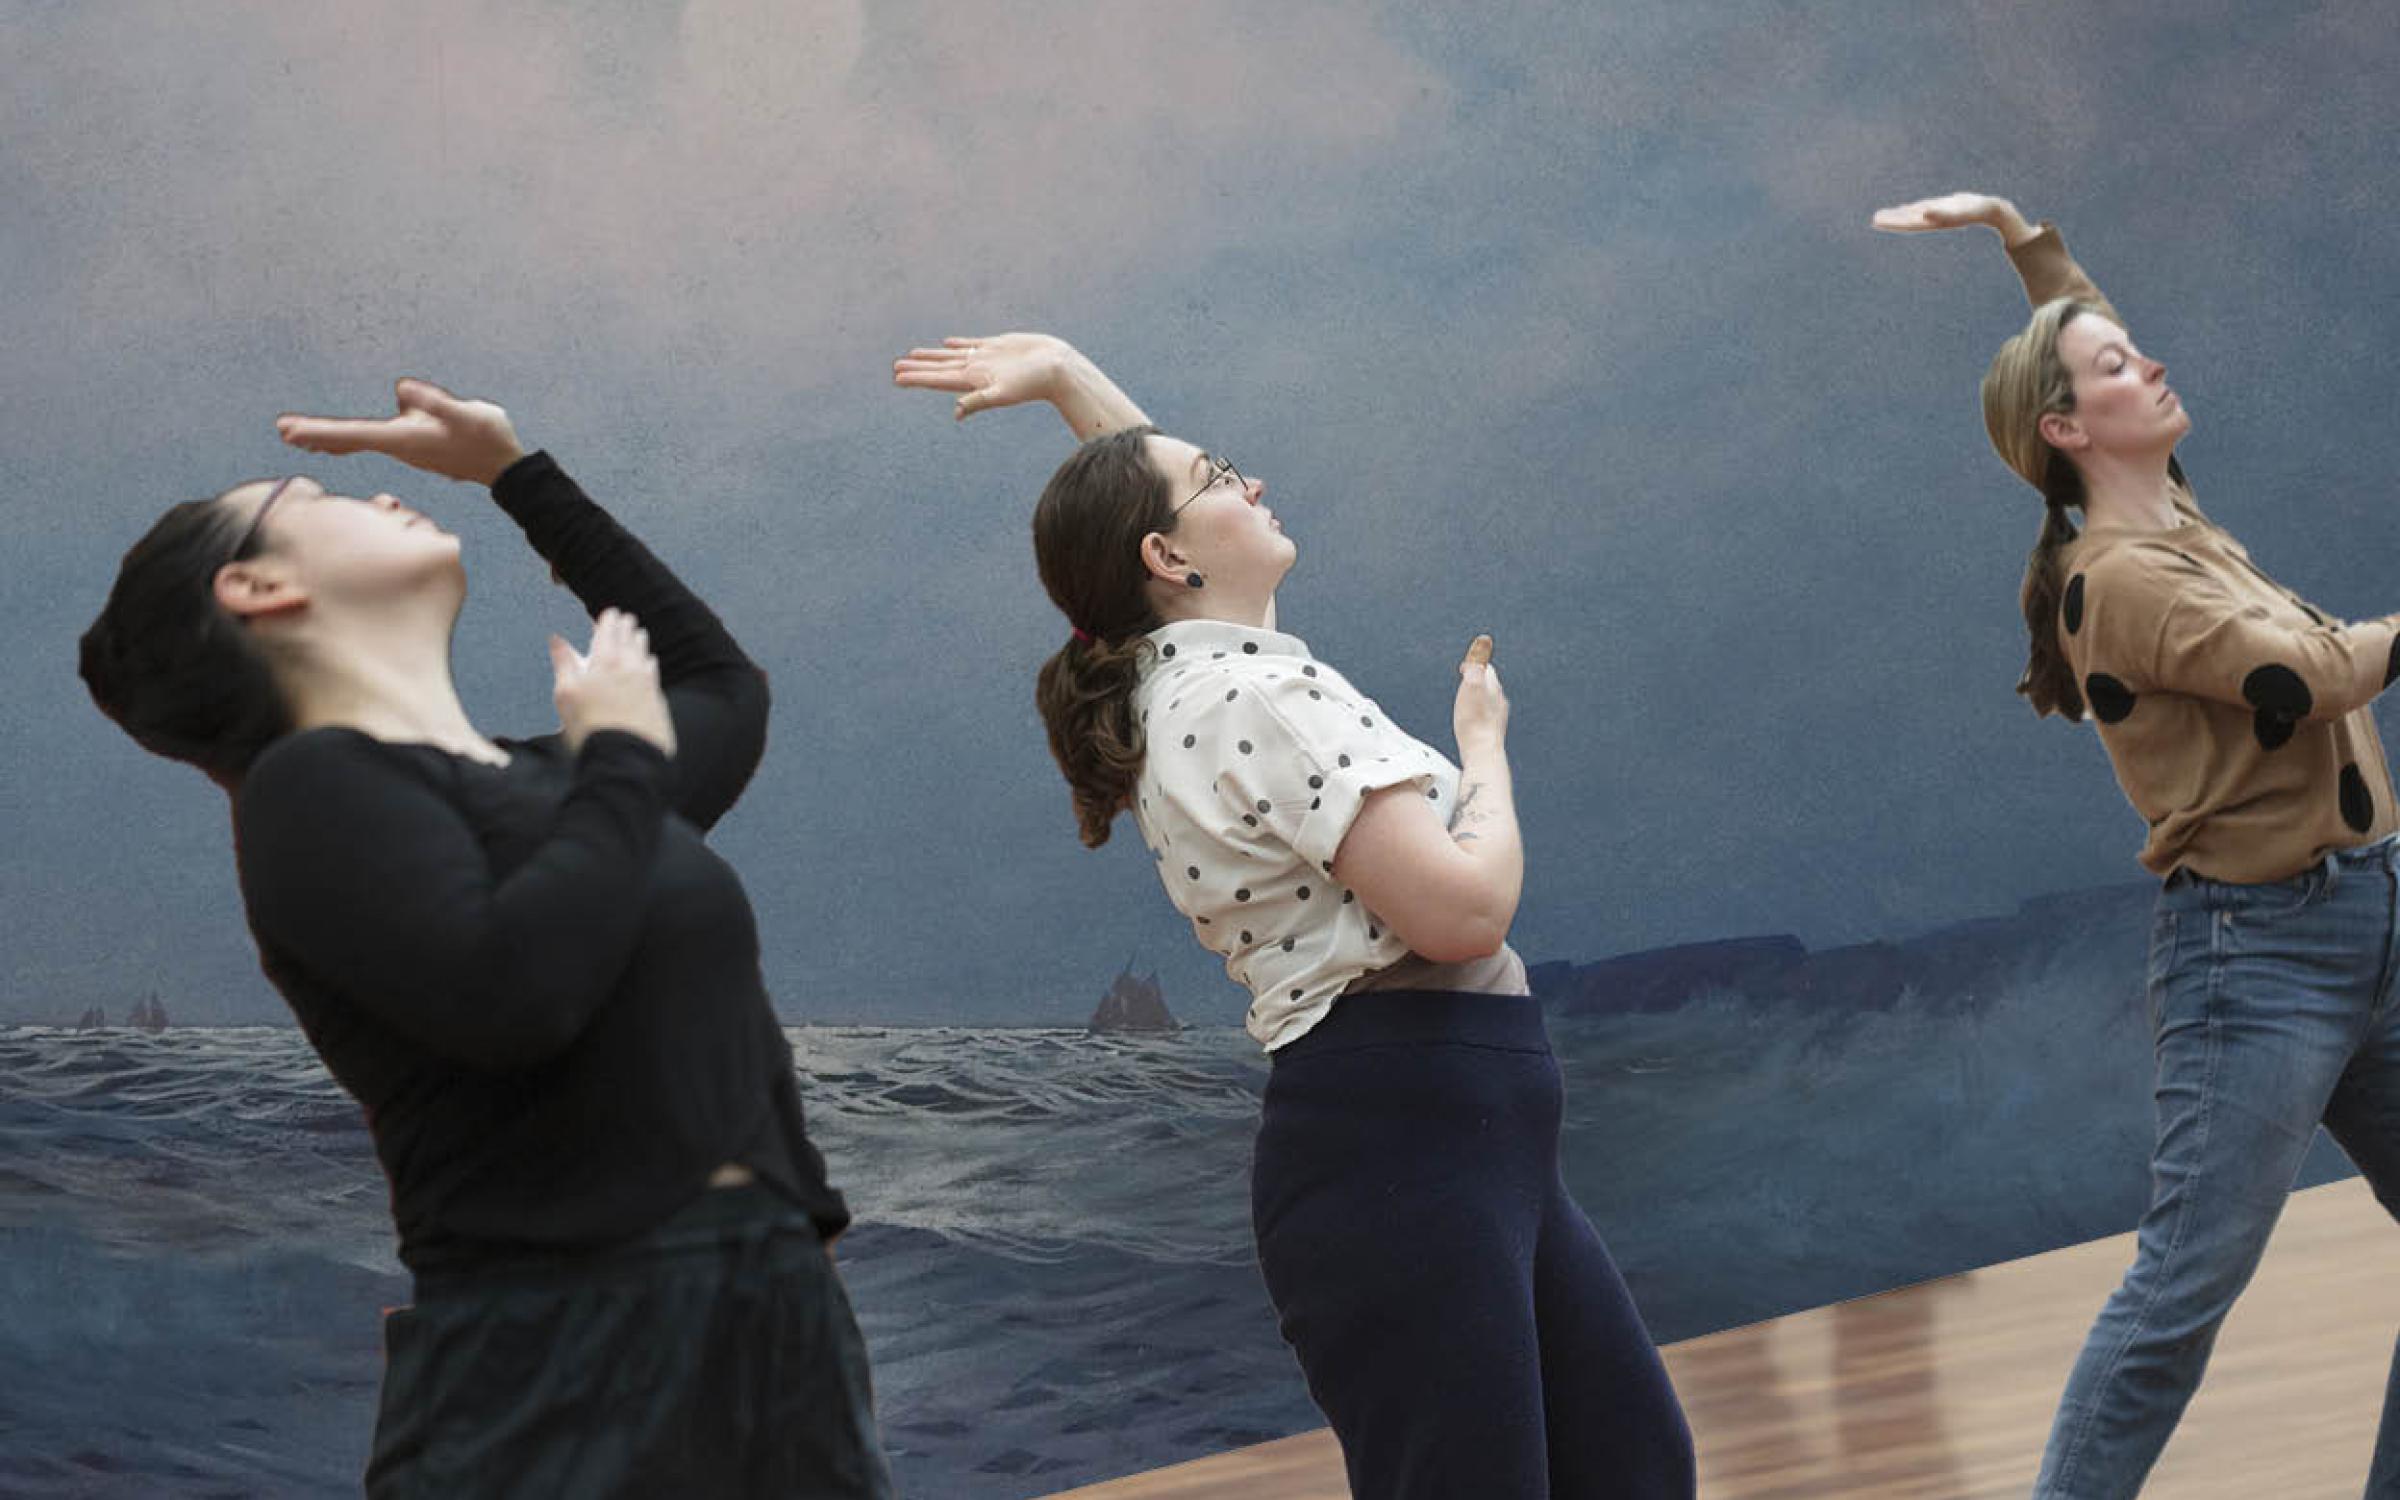 Three people are bent backwards in the same position. There's a mural of an ocean with a cloudy blue sky behind them.